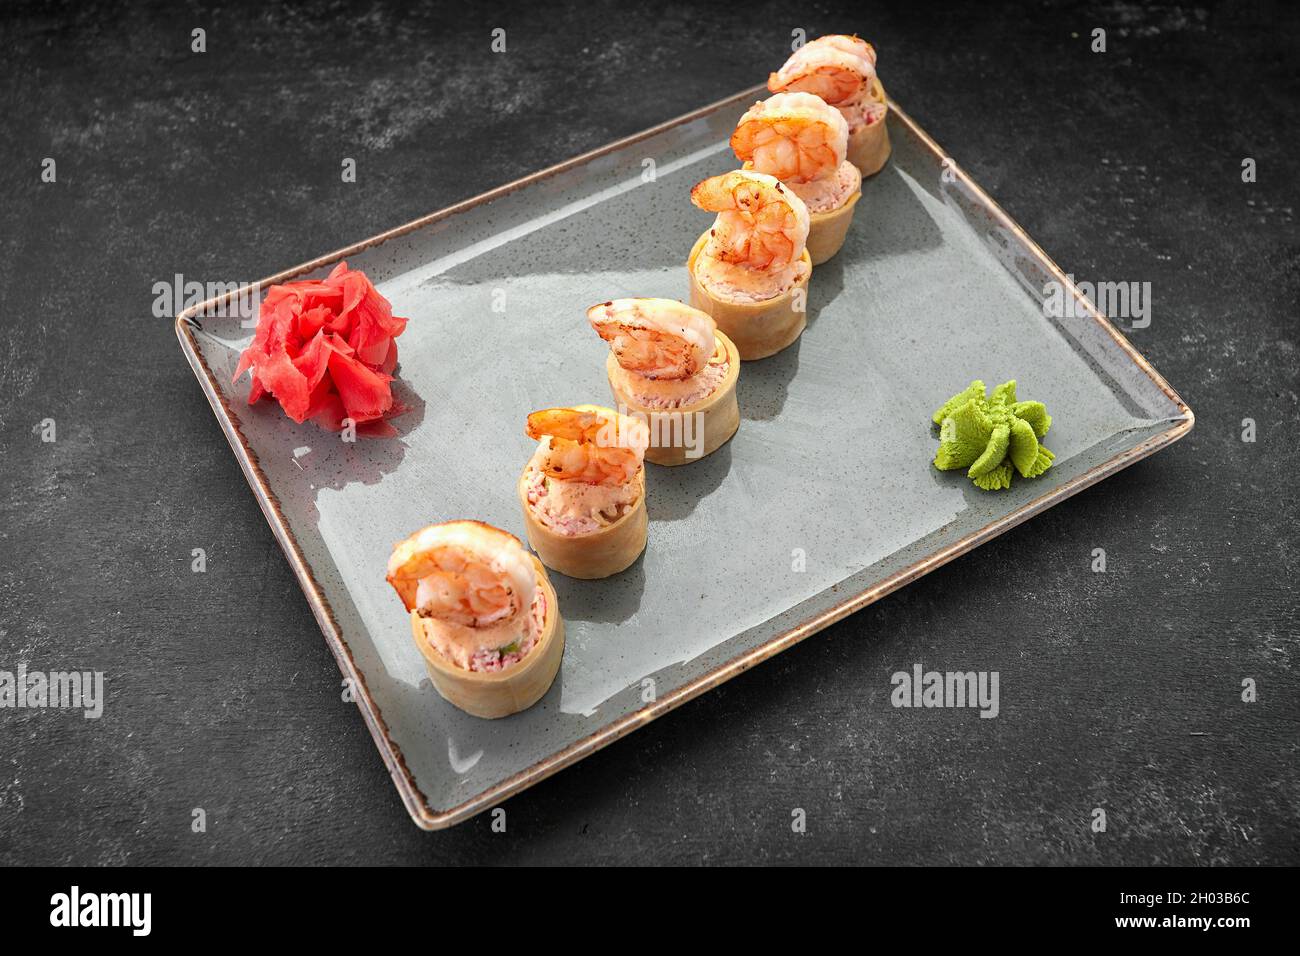 Sushi rolls with omelet, shrimps and crab sticks Stock Photo